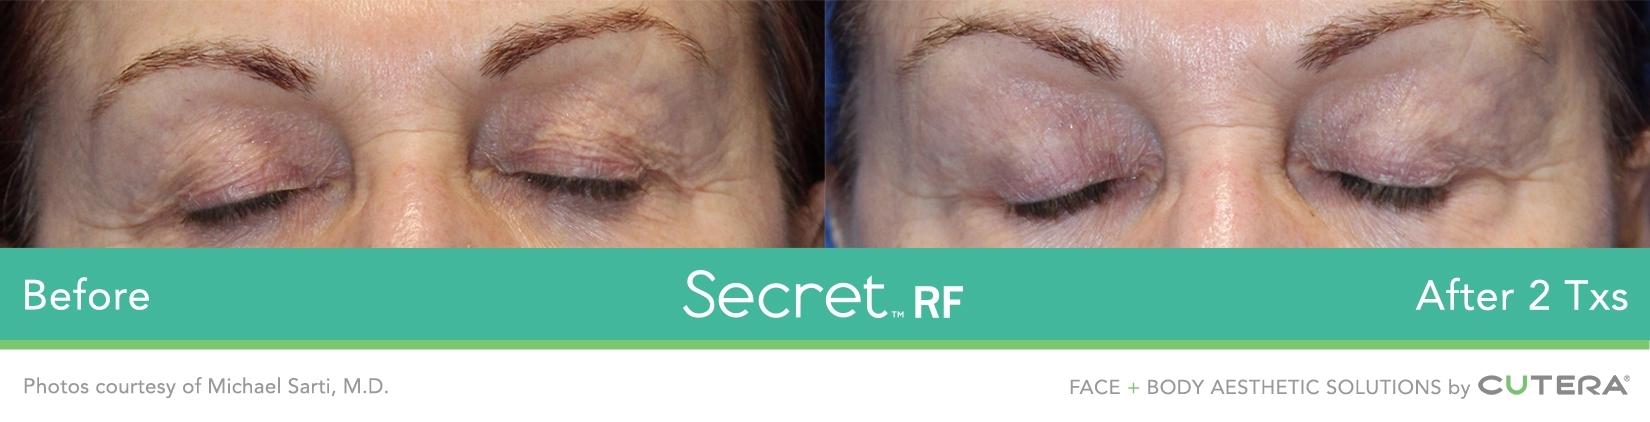 Secret RF: Patient 10 - Before and After 1